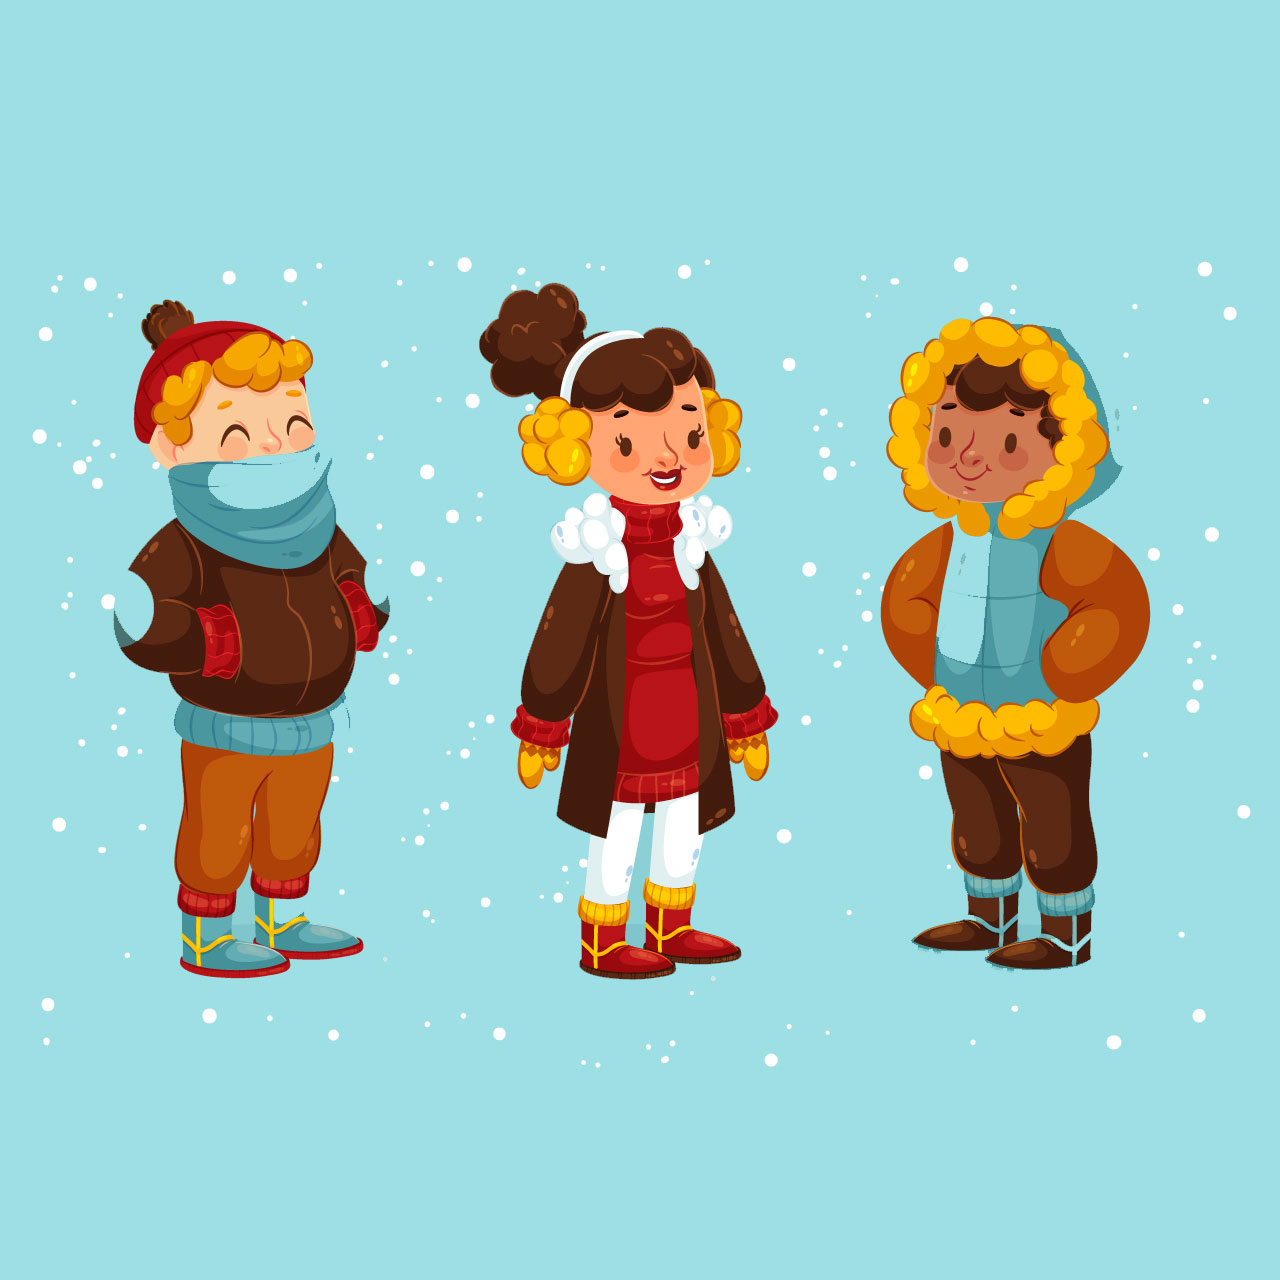 People wearing winter clothes hand drawing sketch cartoon image